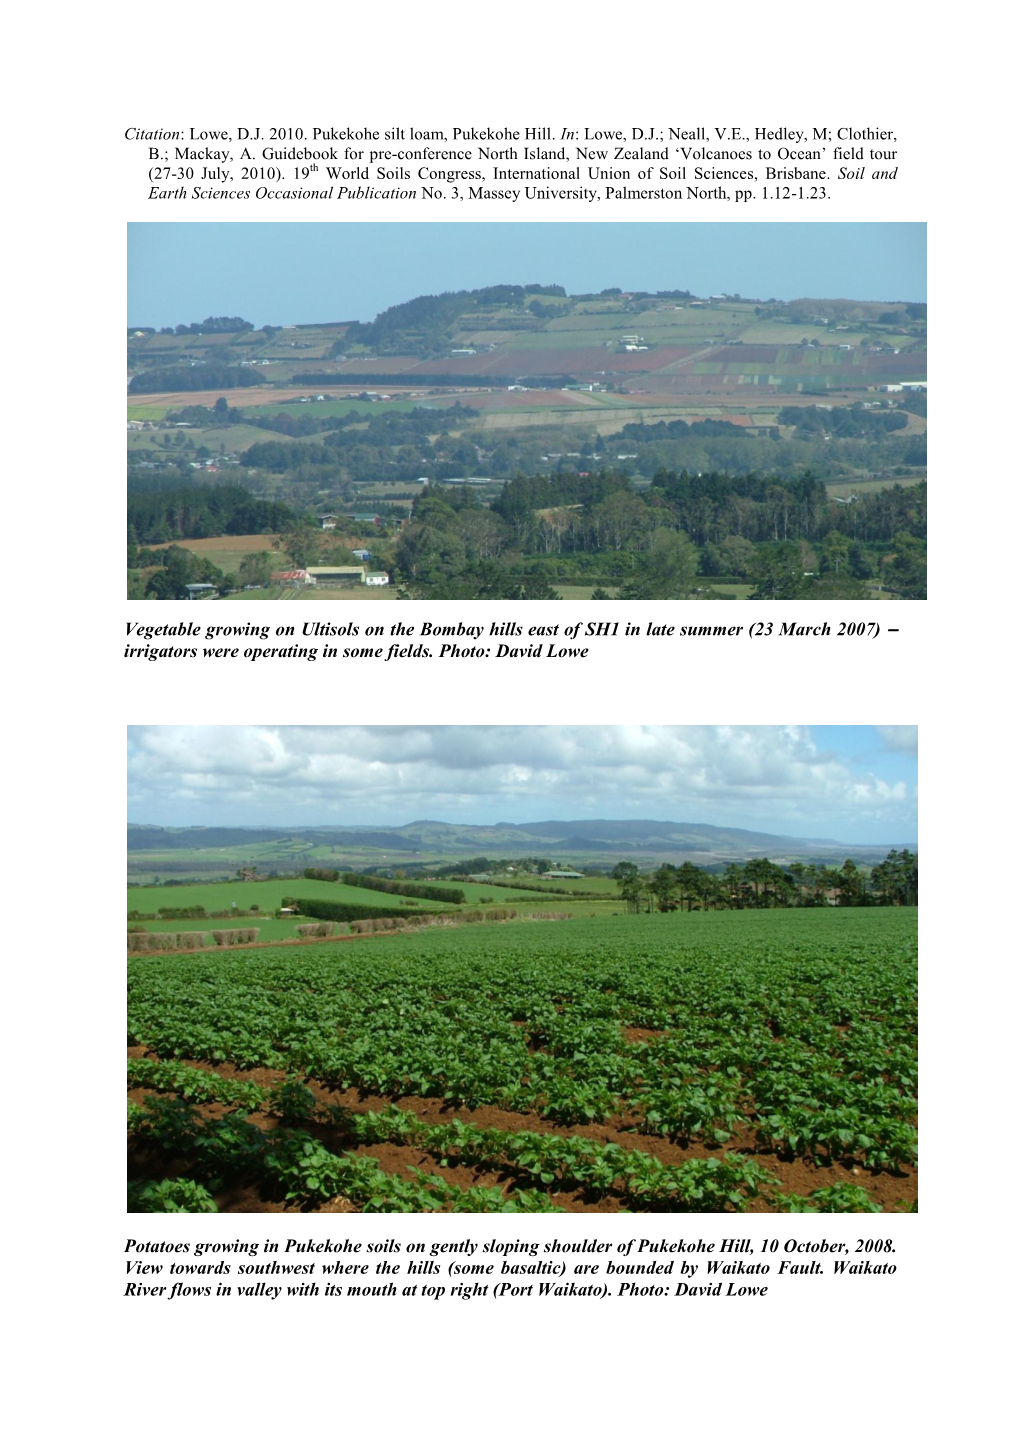 Vegetable Growing on Ultisols on the Bombay Hills East of SH1 in Late Summer (23 March 2007)  Irrigators Were Operating in Some Fields